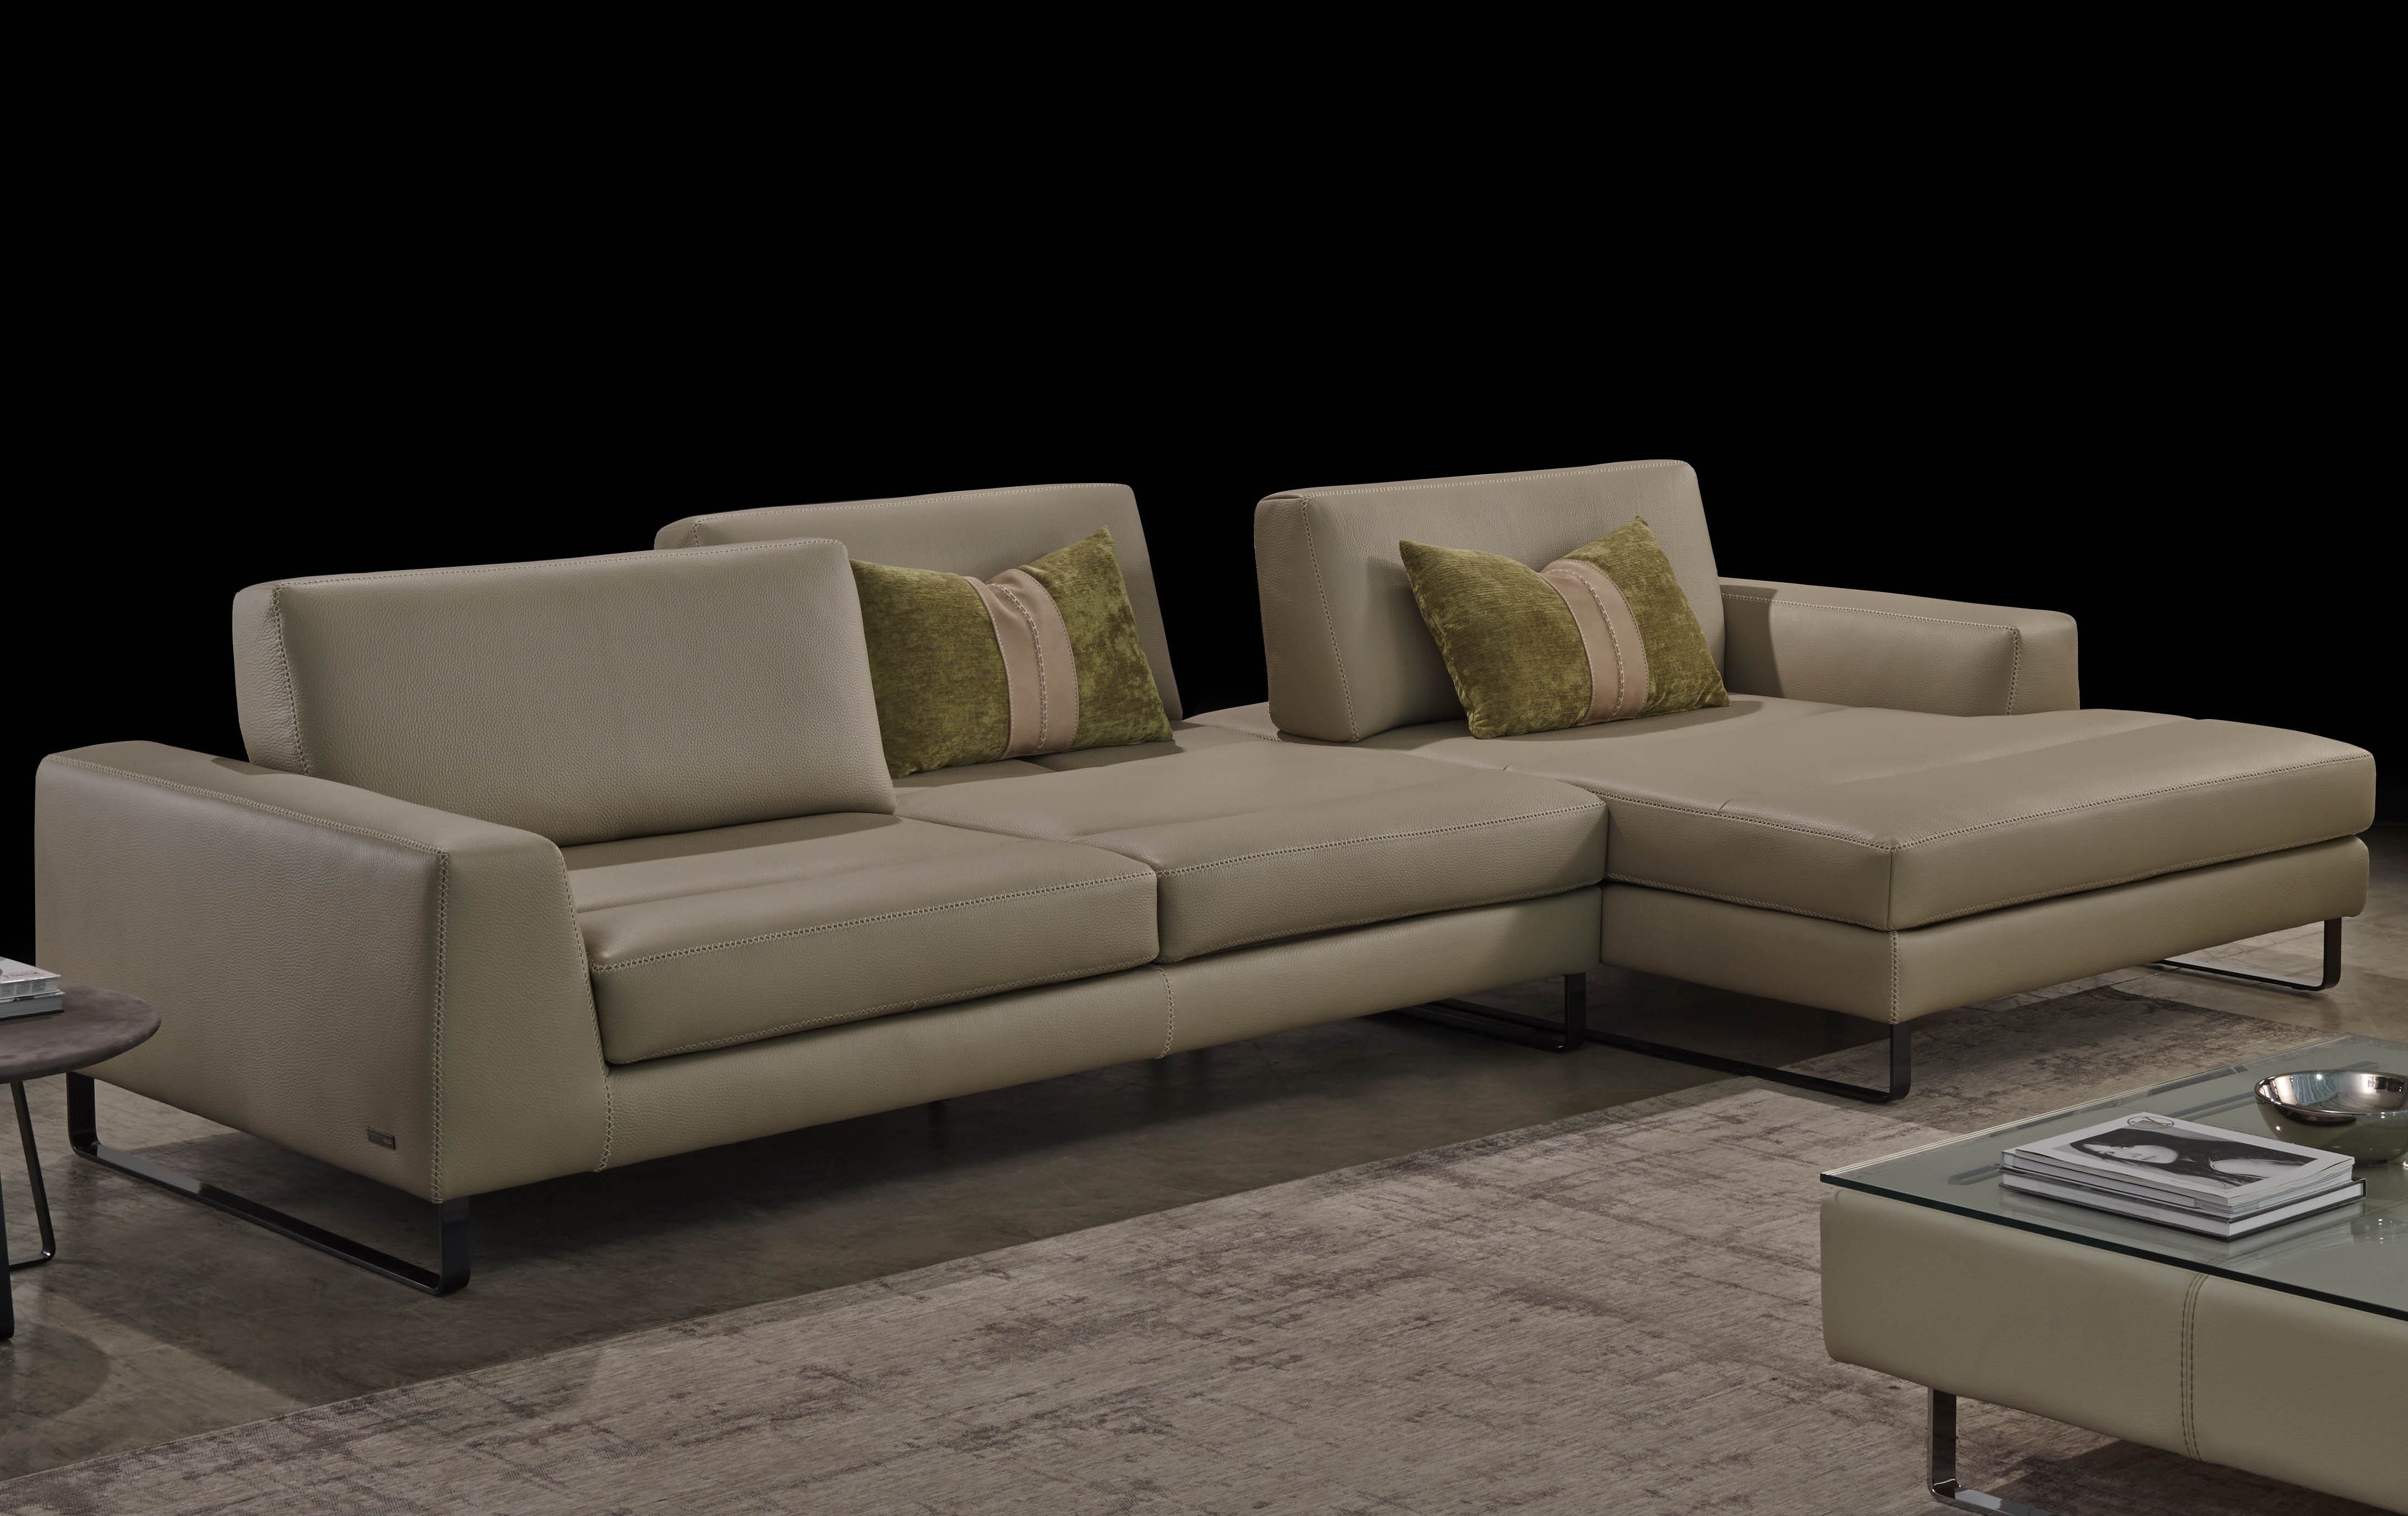 Well Liked Urban Sectional, Gamma International Italy – Italmoda Furniture Store Pertaining To Nashua Nh Sectional Sofas (View 11 of 15)